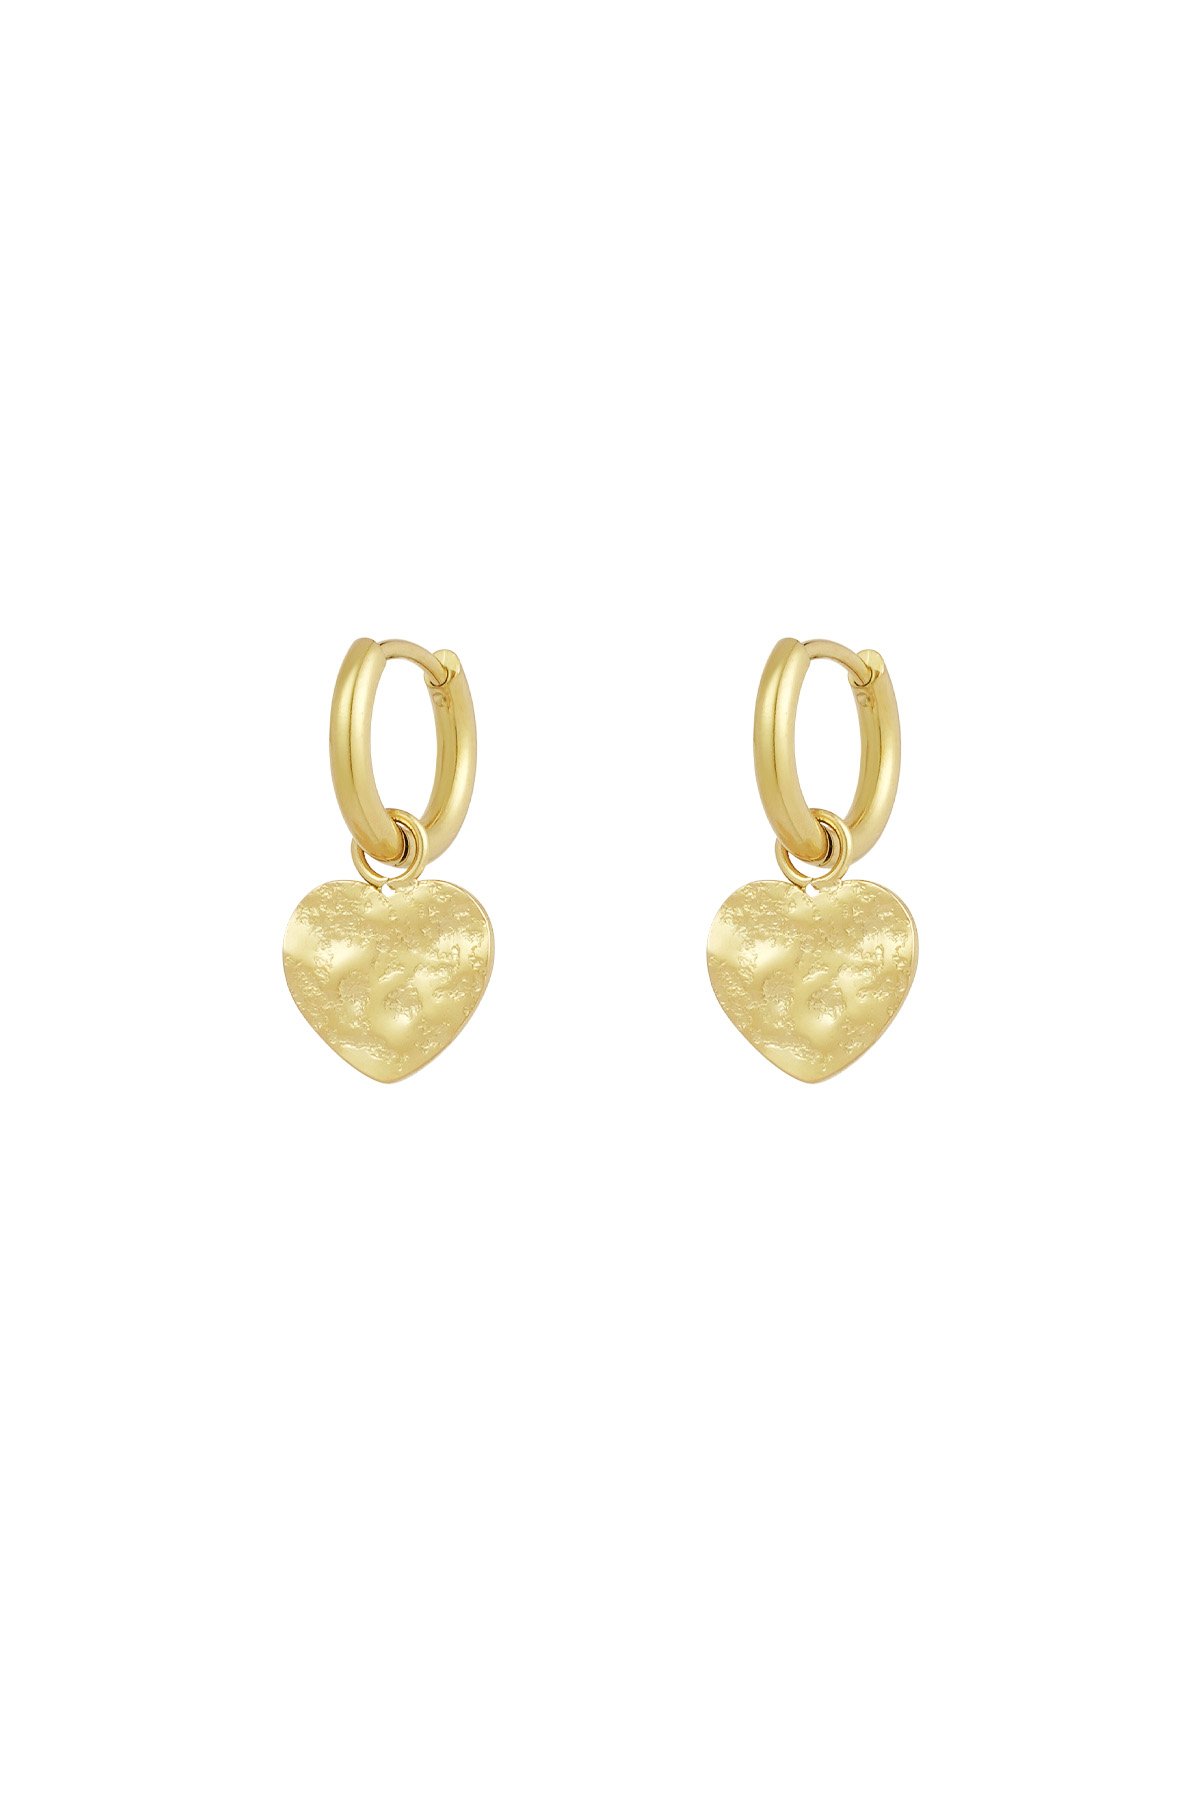 Earrings heart for you - gold h5 